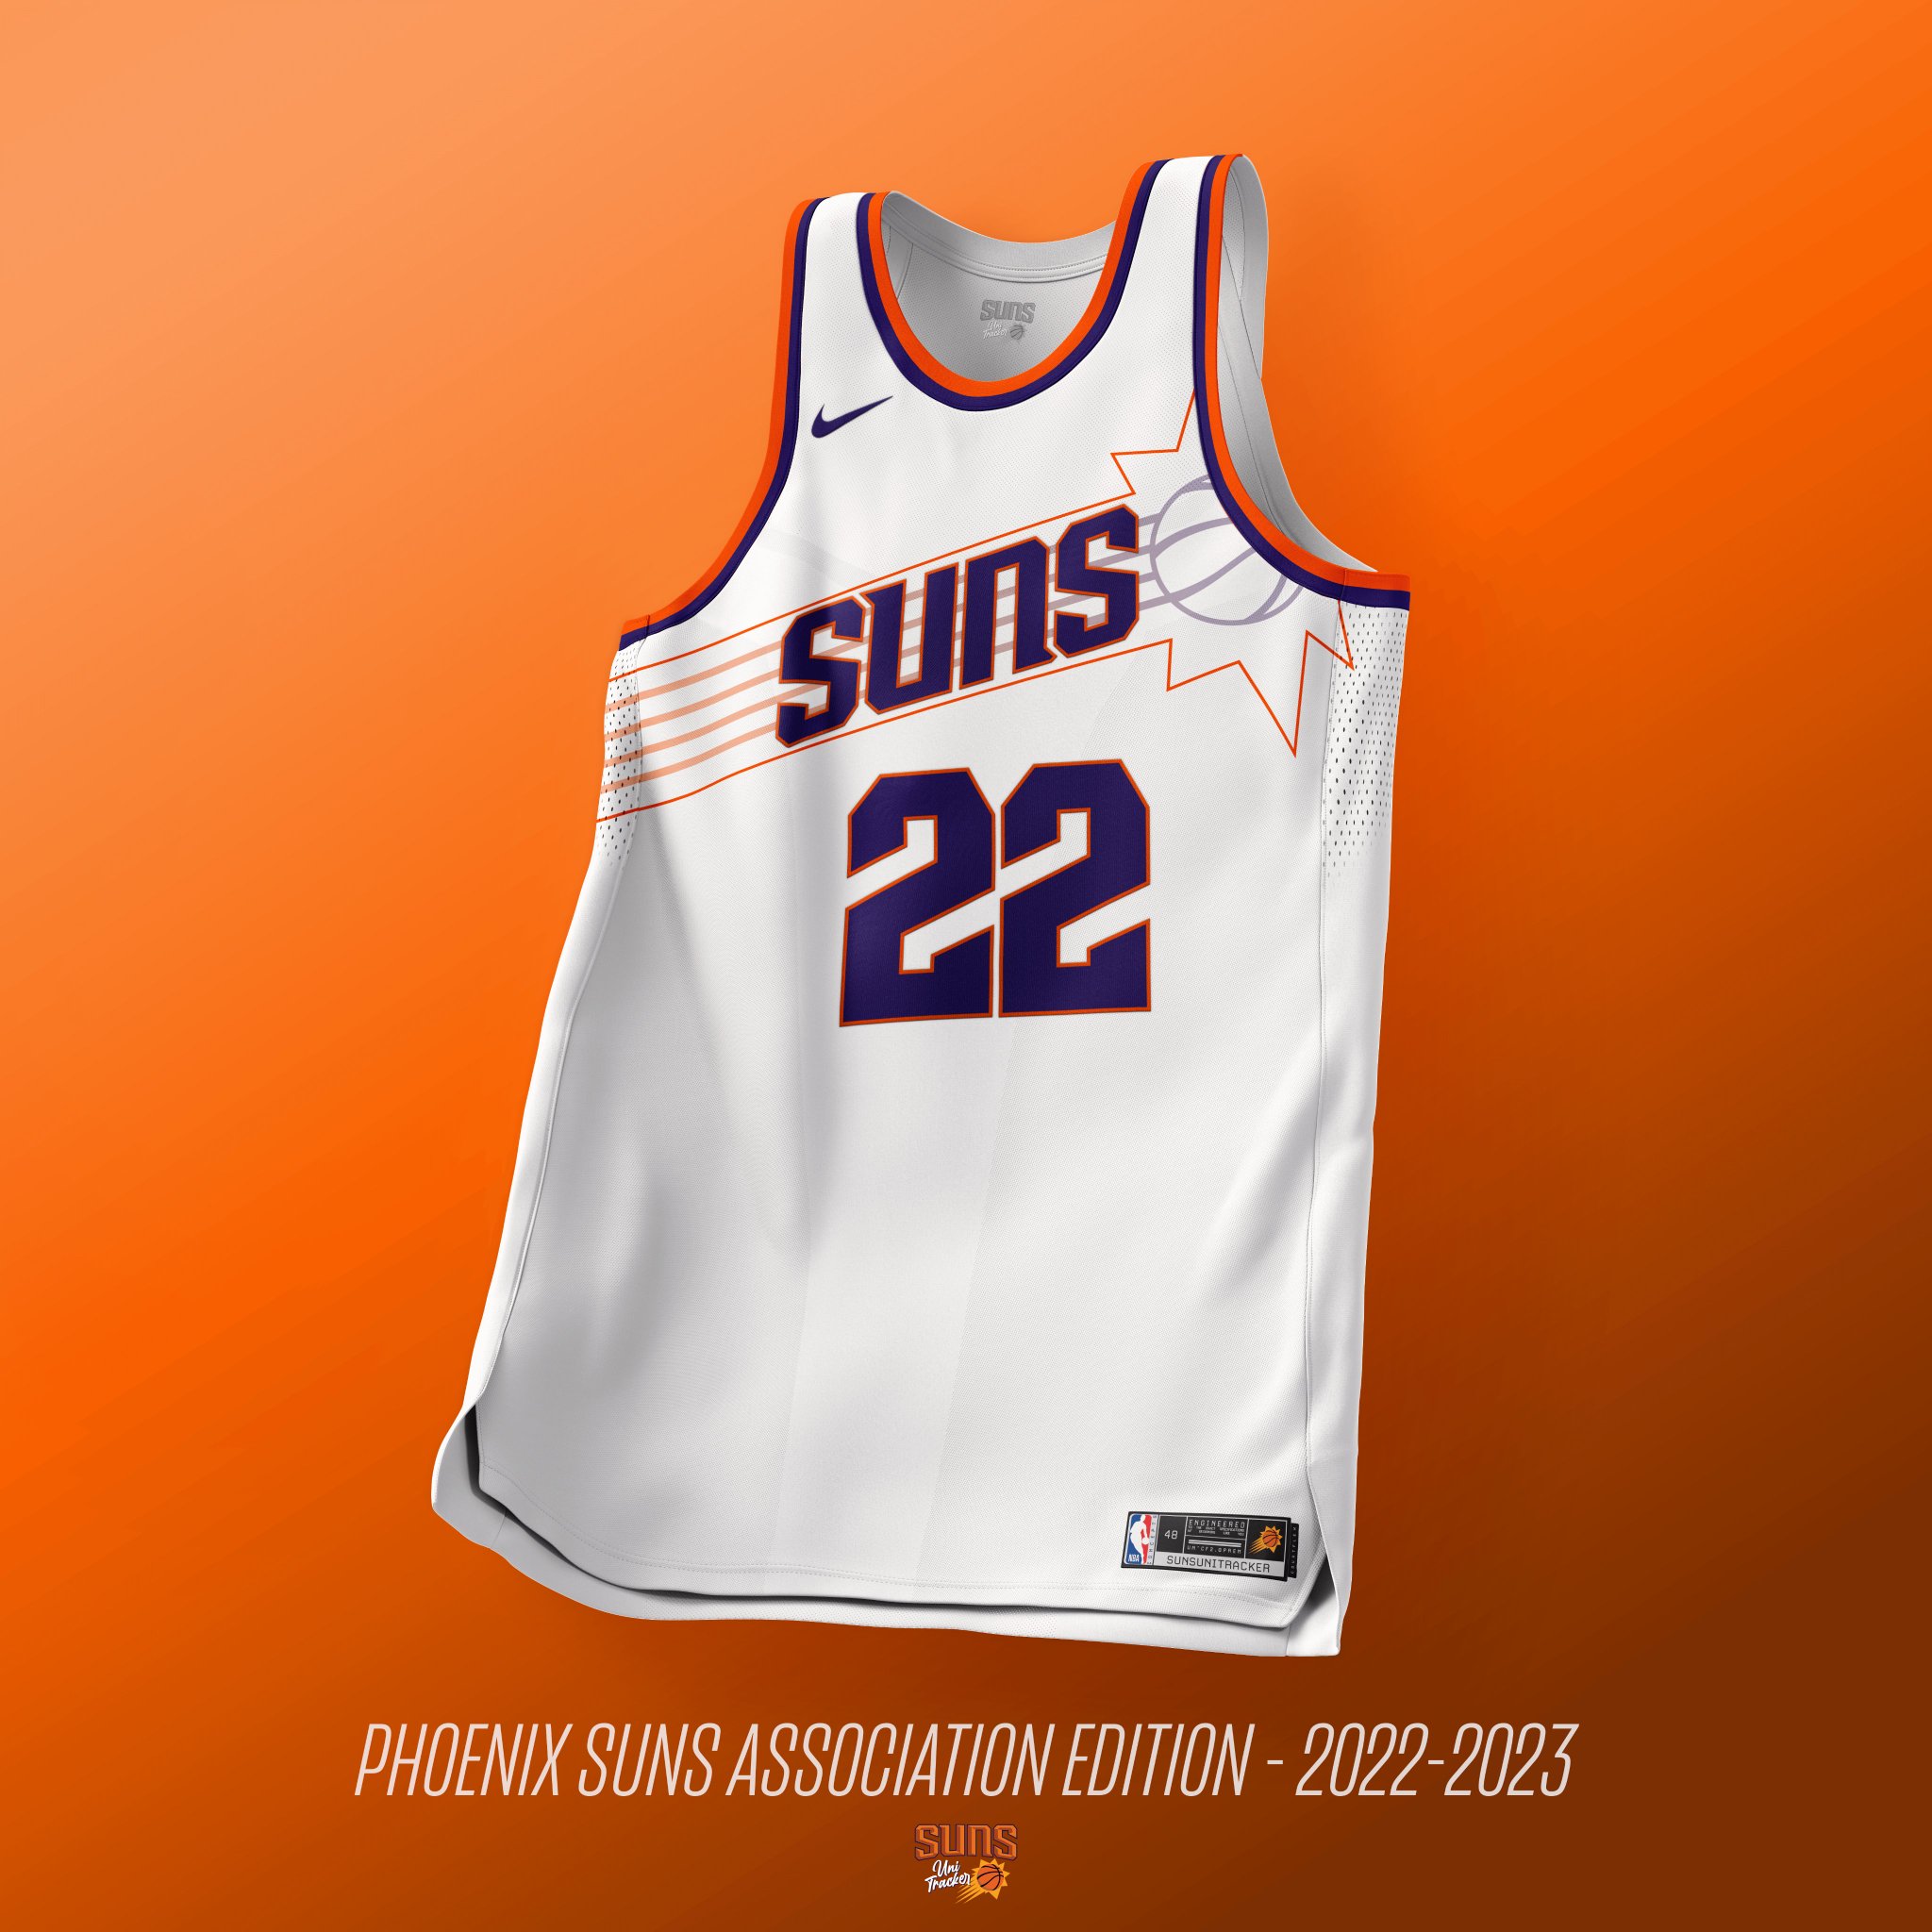 New RUMORED Phoenix Suns Jerseys? (My Thoughts) 